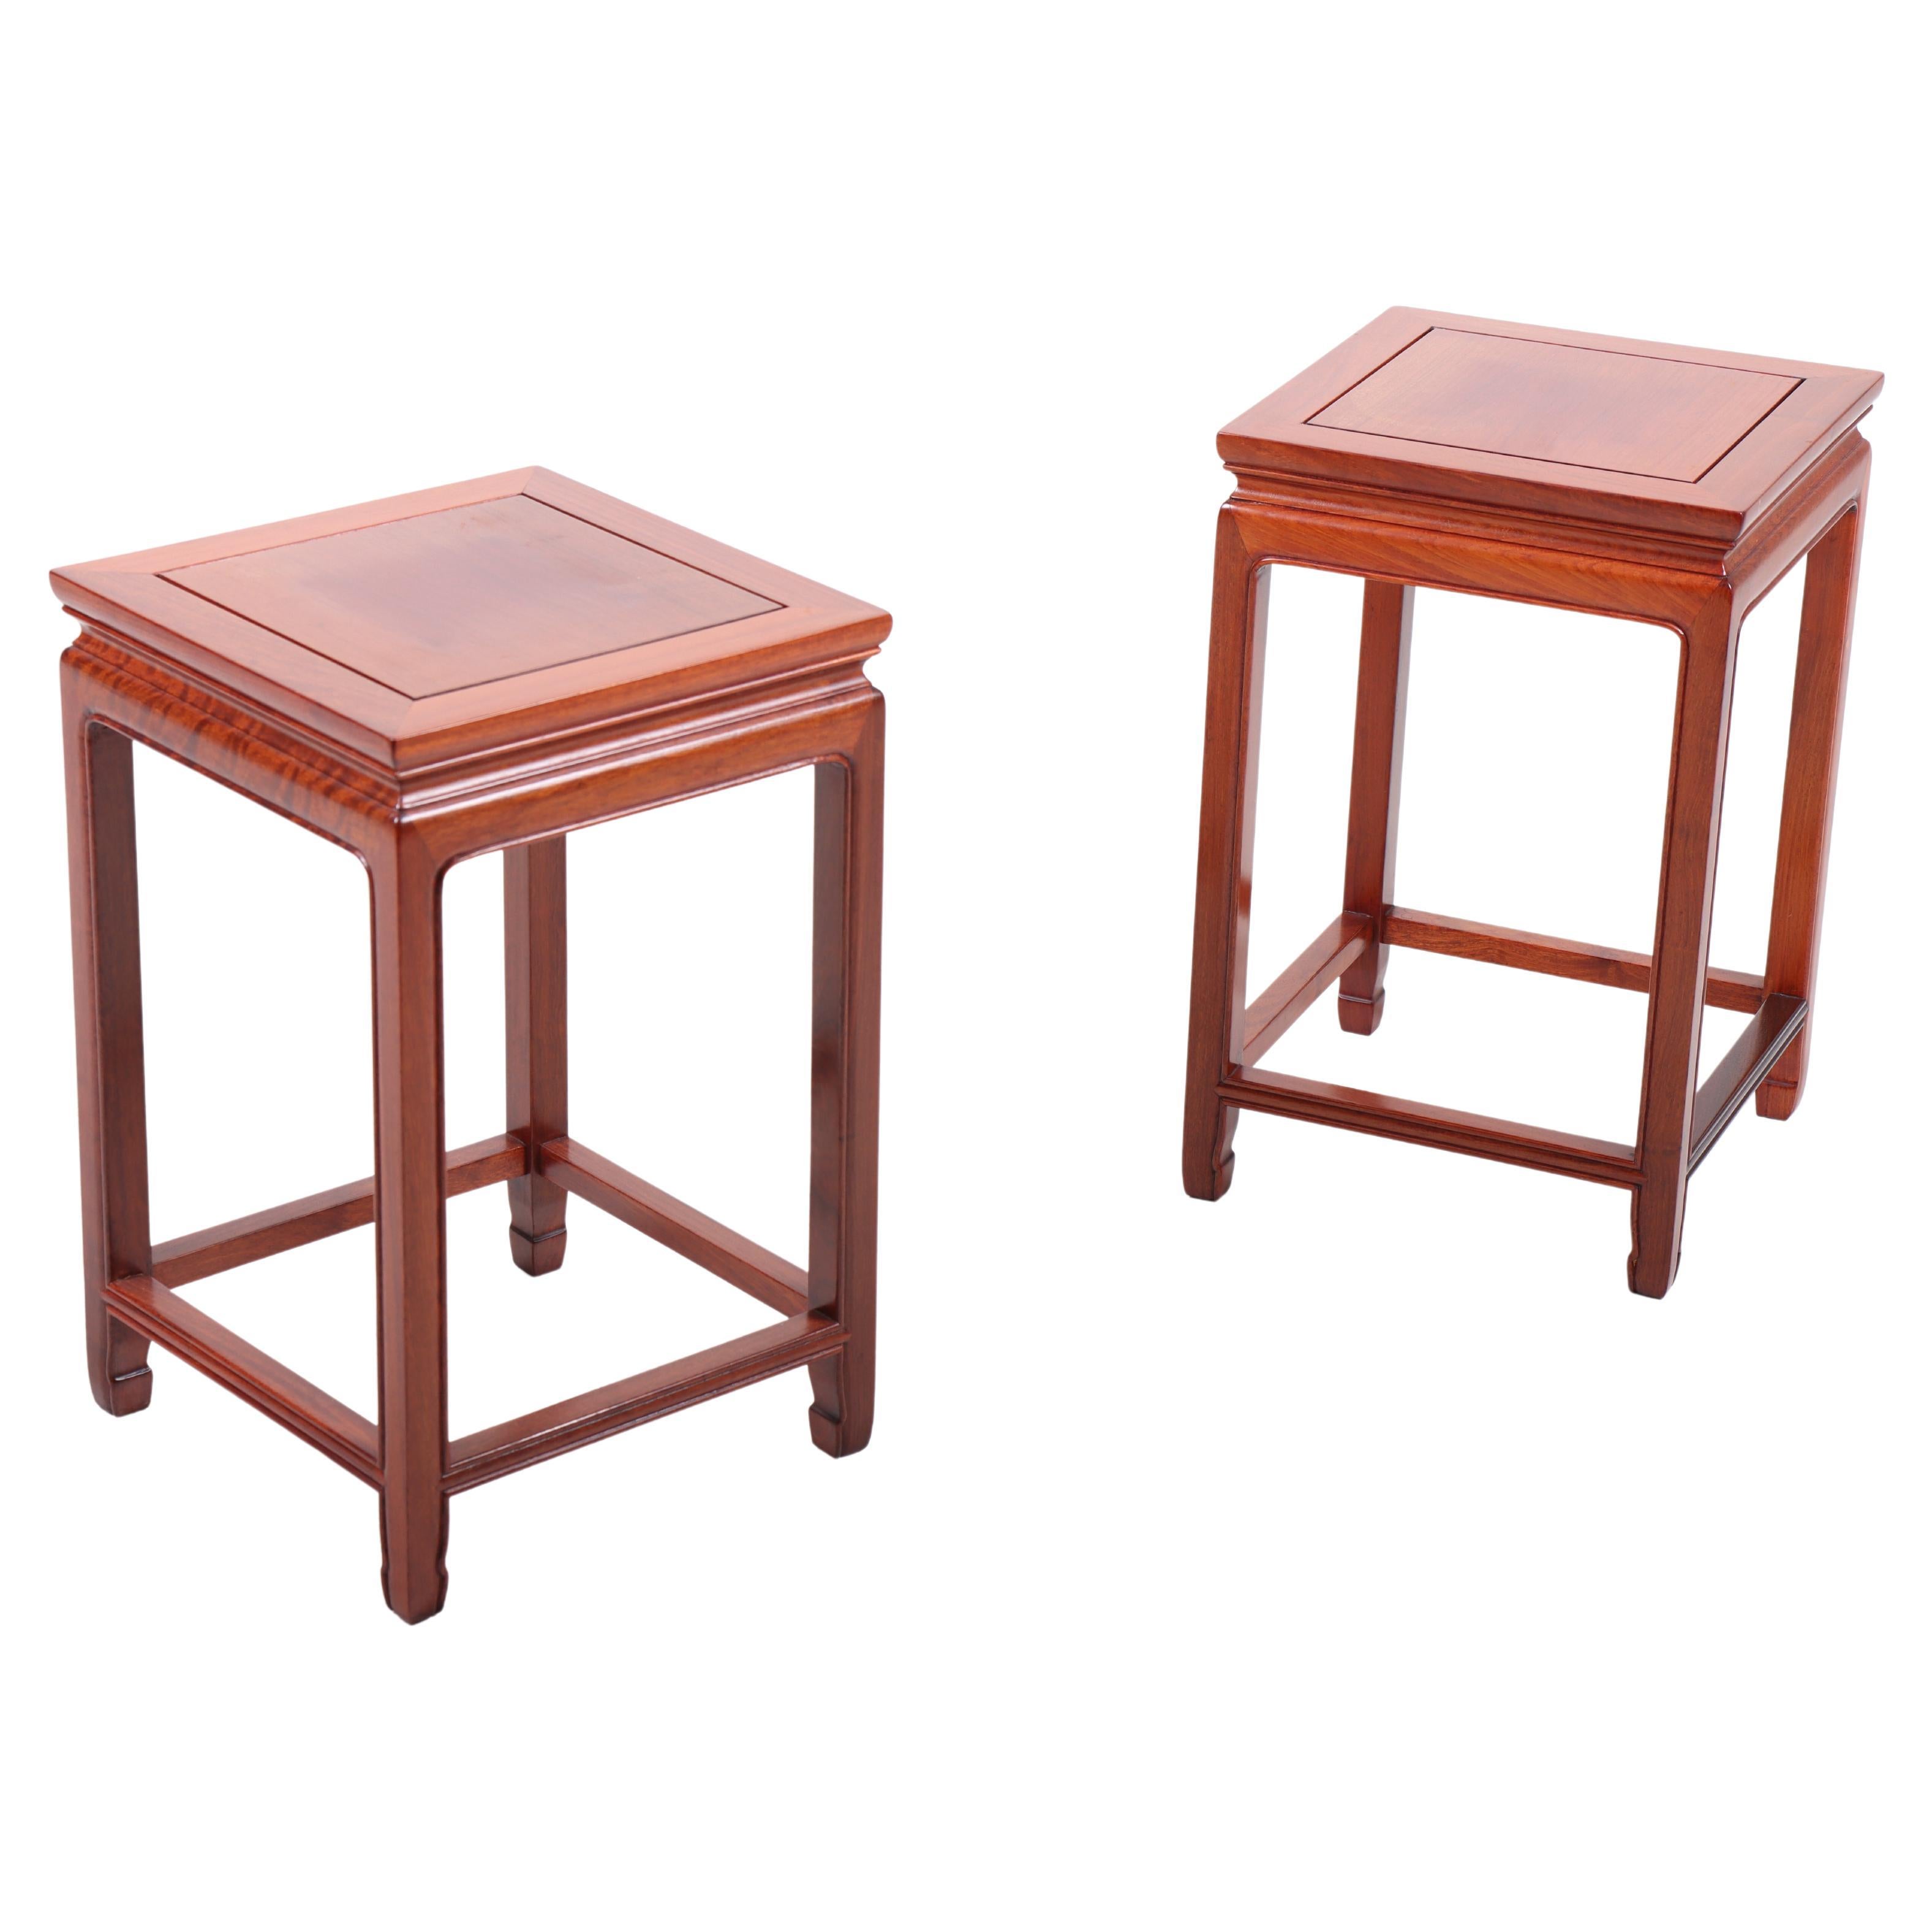 Pair of Chinese Side Tables in Mahogany, 1960s For Sale